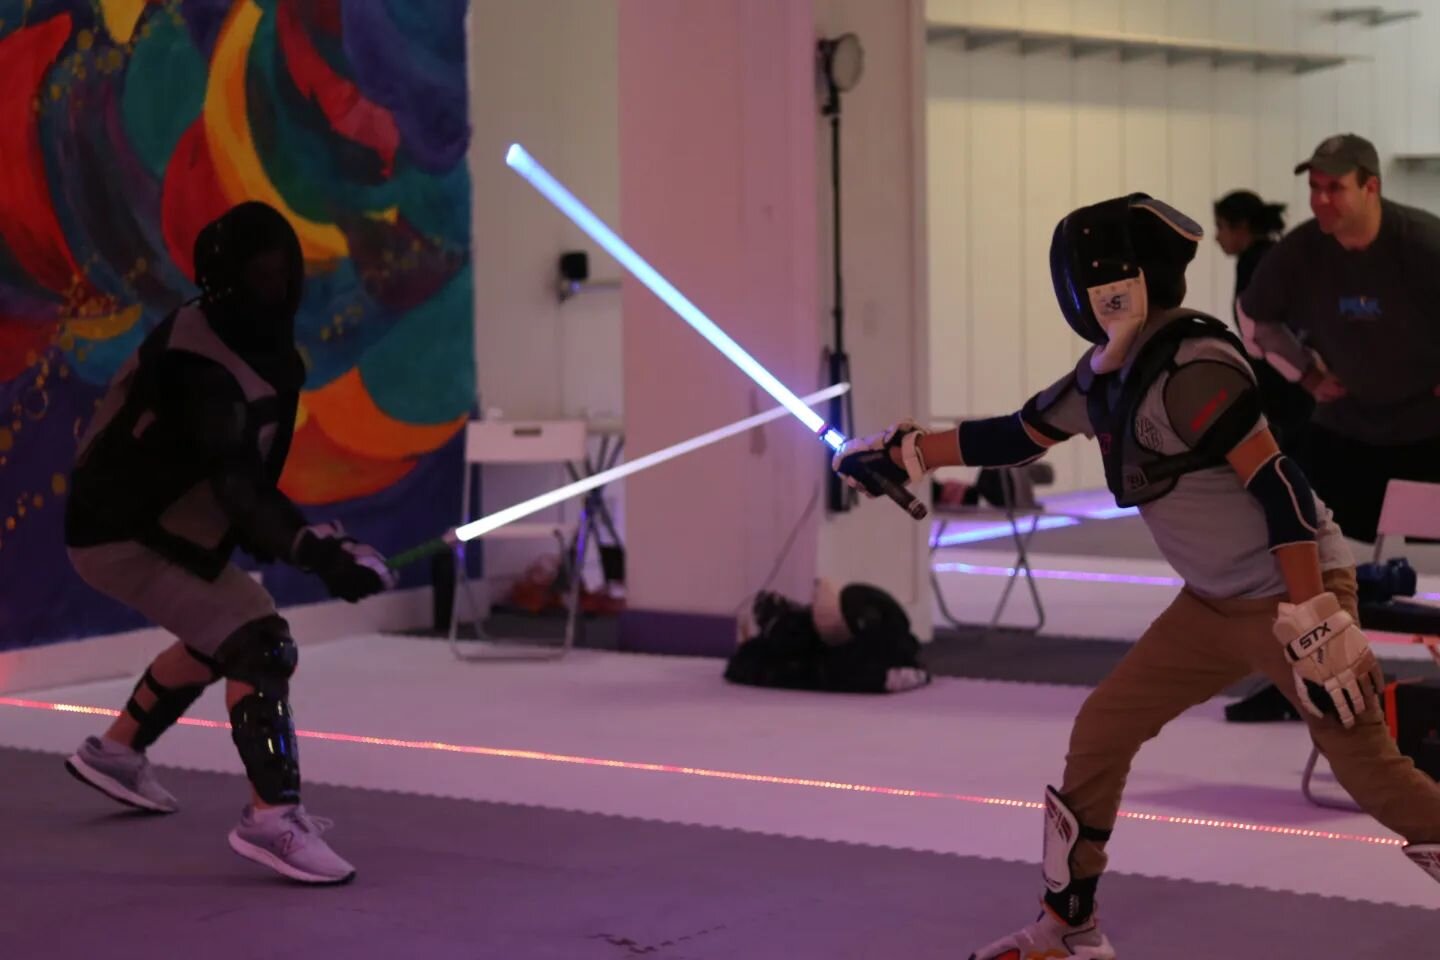 REMINDER: practice at SEVEN tonight.  This week we are reviewing what we did well and didn't do well at the tournament and how we can do better! Don't miss session! 

Wanna join our team? Message us. Beginners welcome!

#LightspeedSaber